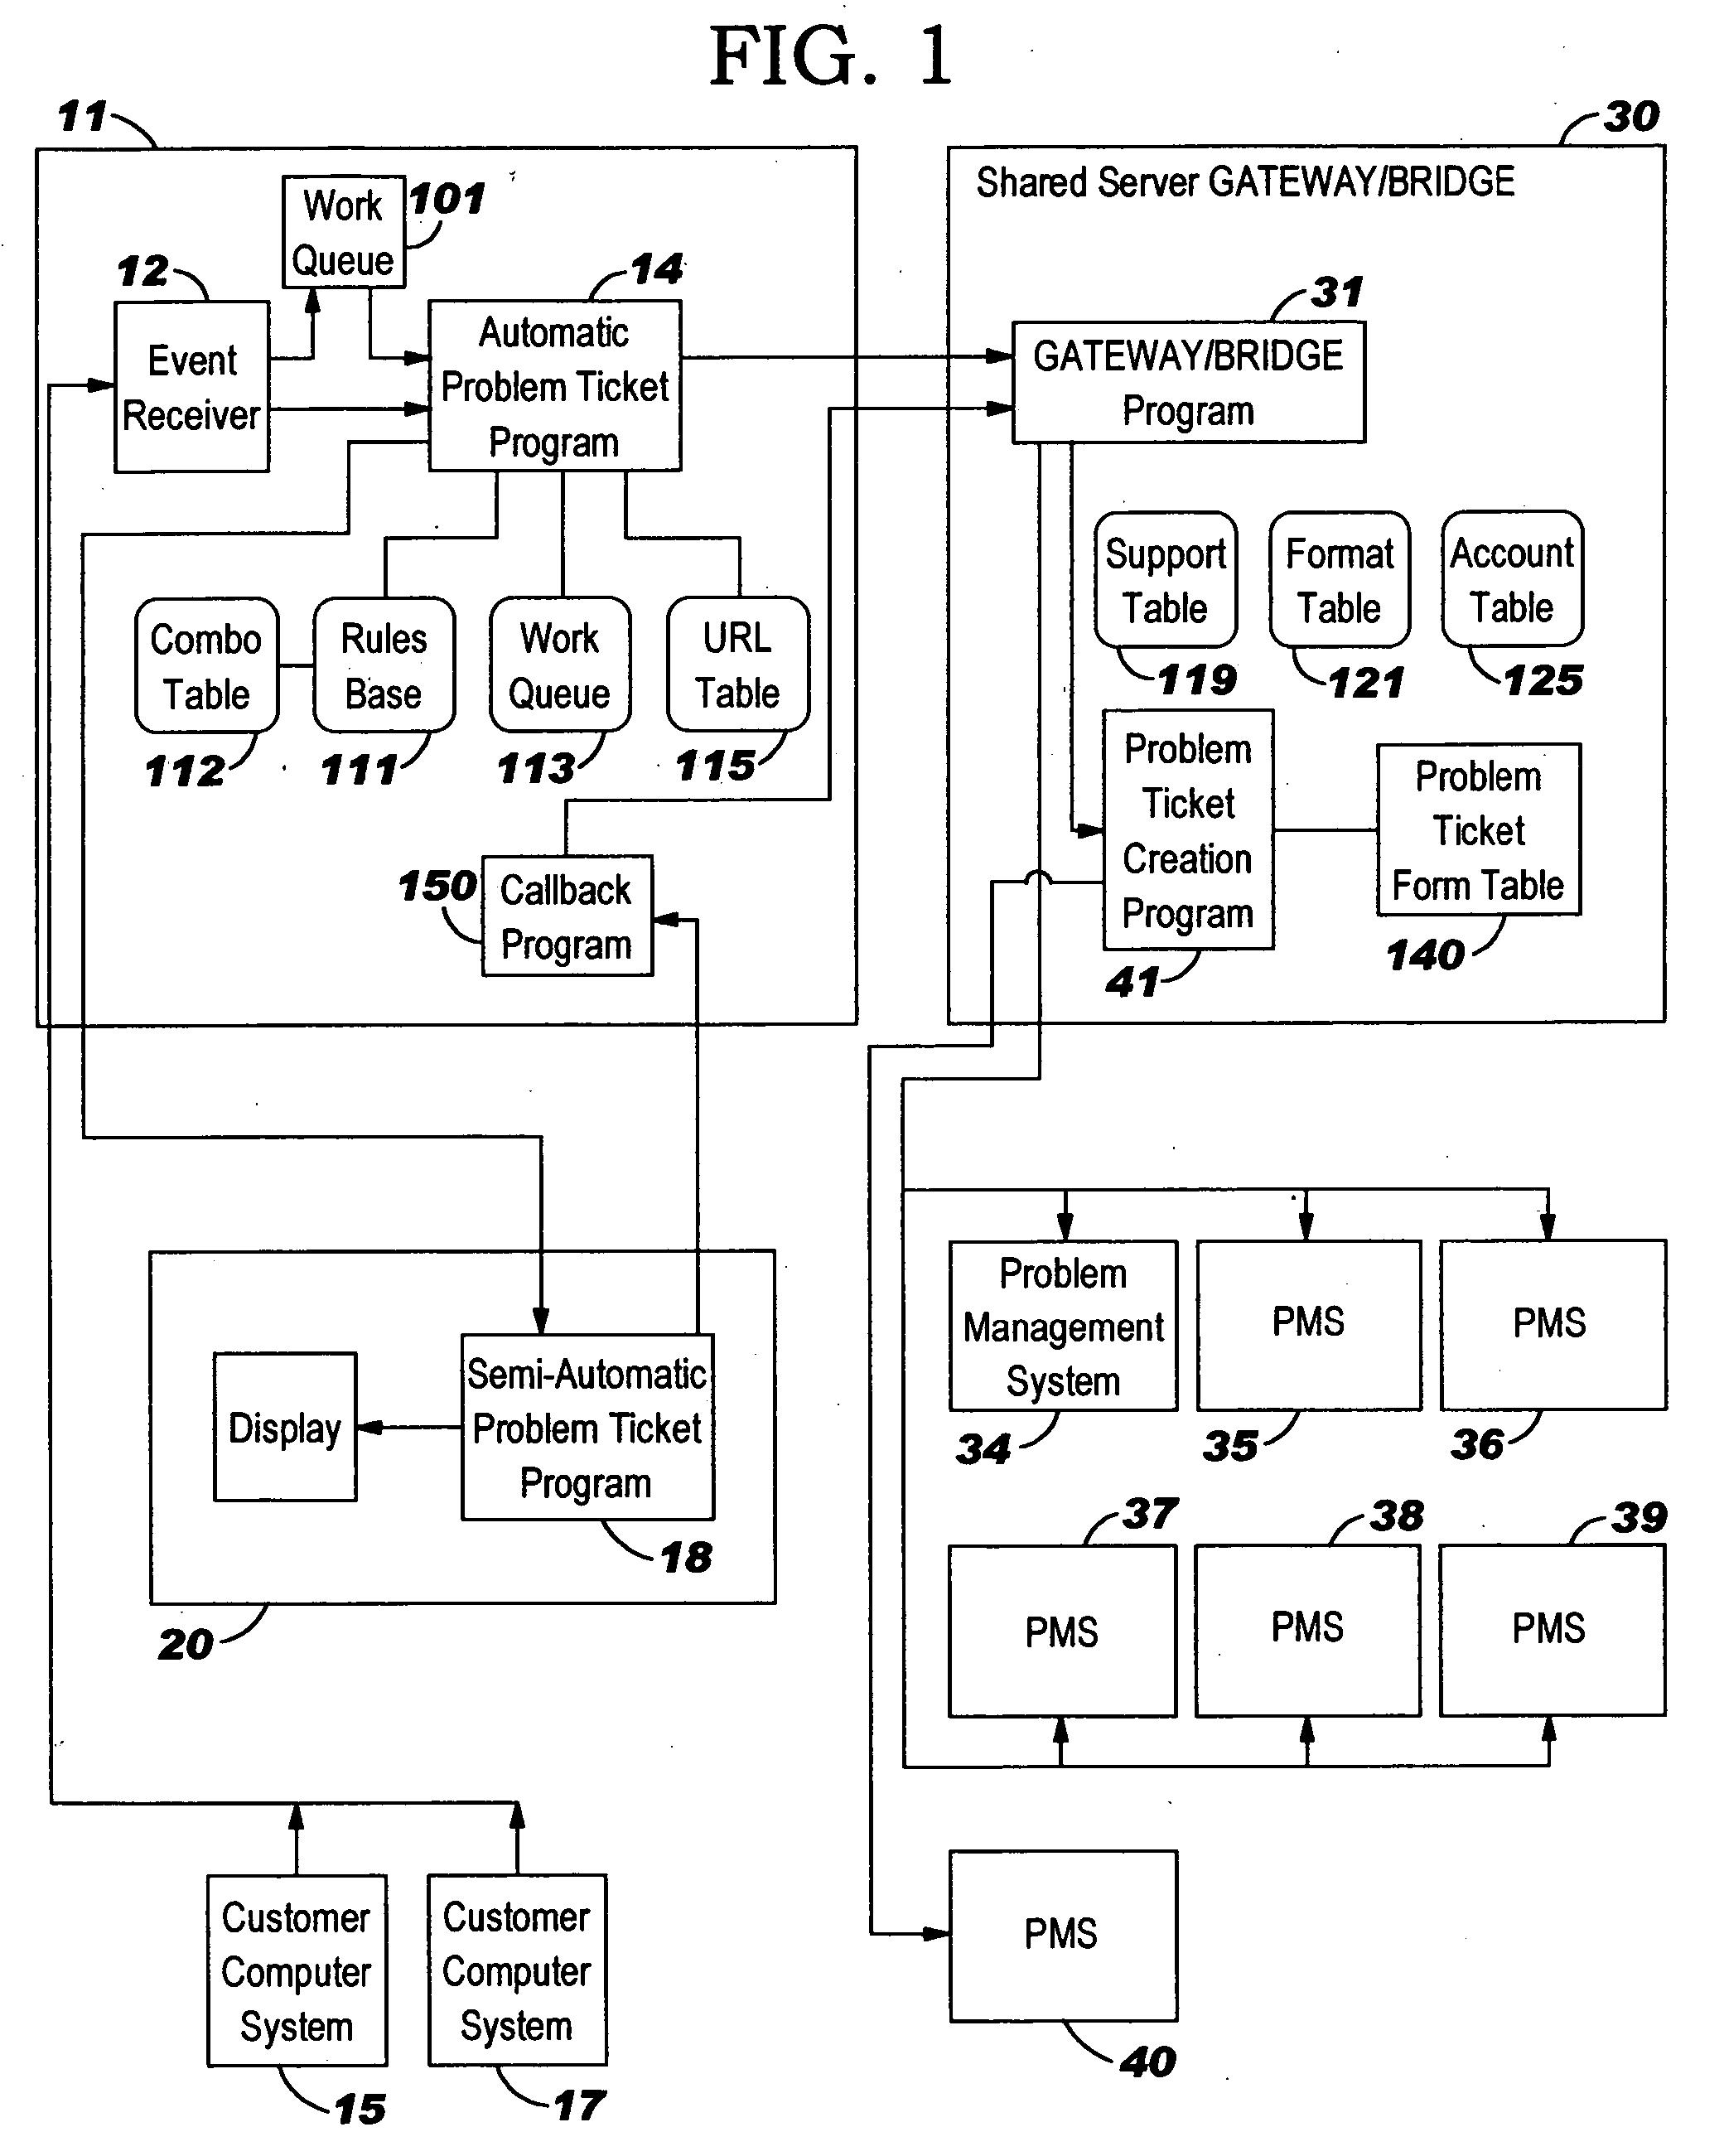 Generation of problem tickets for a computer system